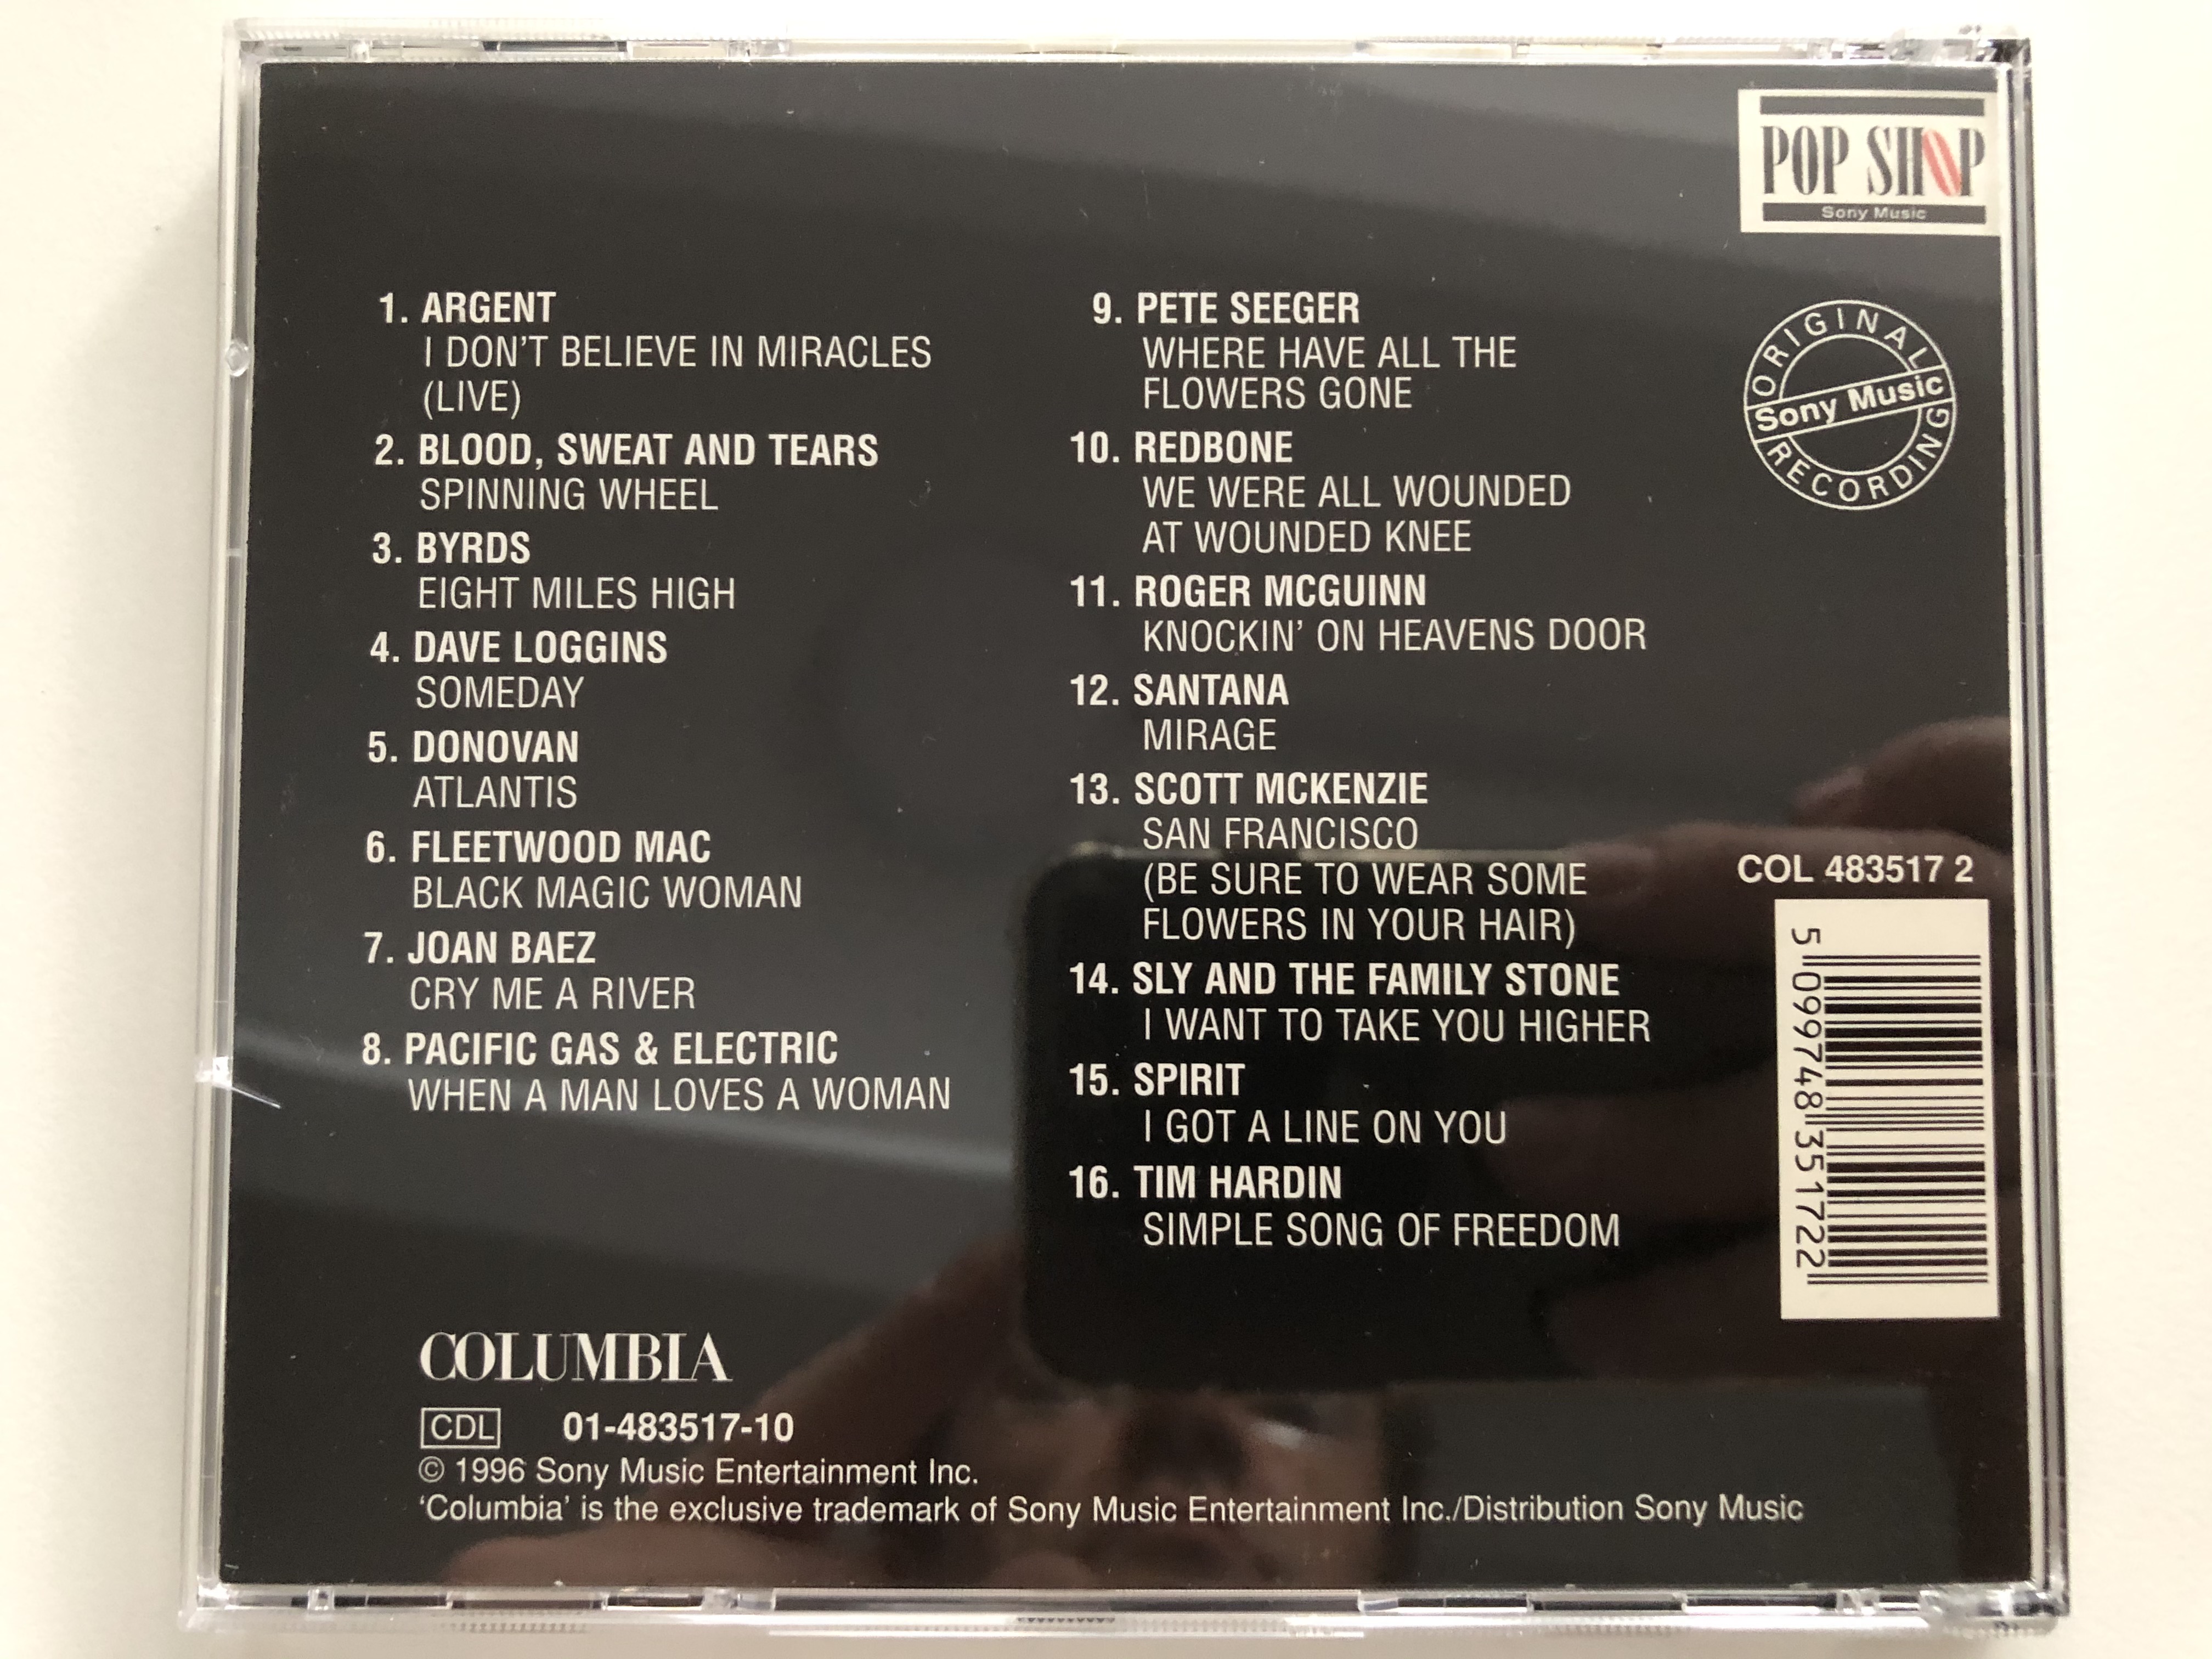 woodstock-memories-argent-i-don-t-believe-in-miracles-live-blood-sweat-and-tears-spinning-wheel-byrds-eight-miles-high-fleetwood-mac-black-magic-woman-columbia-audio-cd-1996-3-.jpg